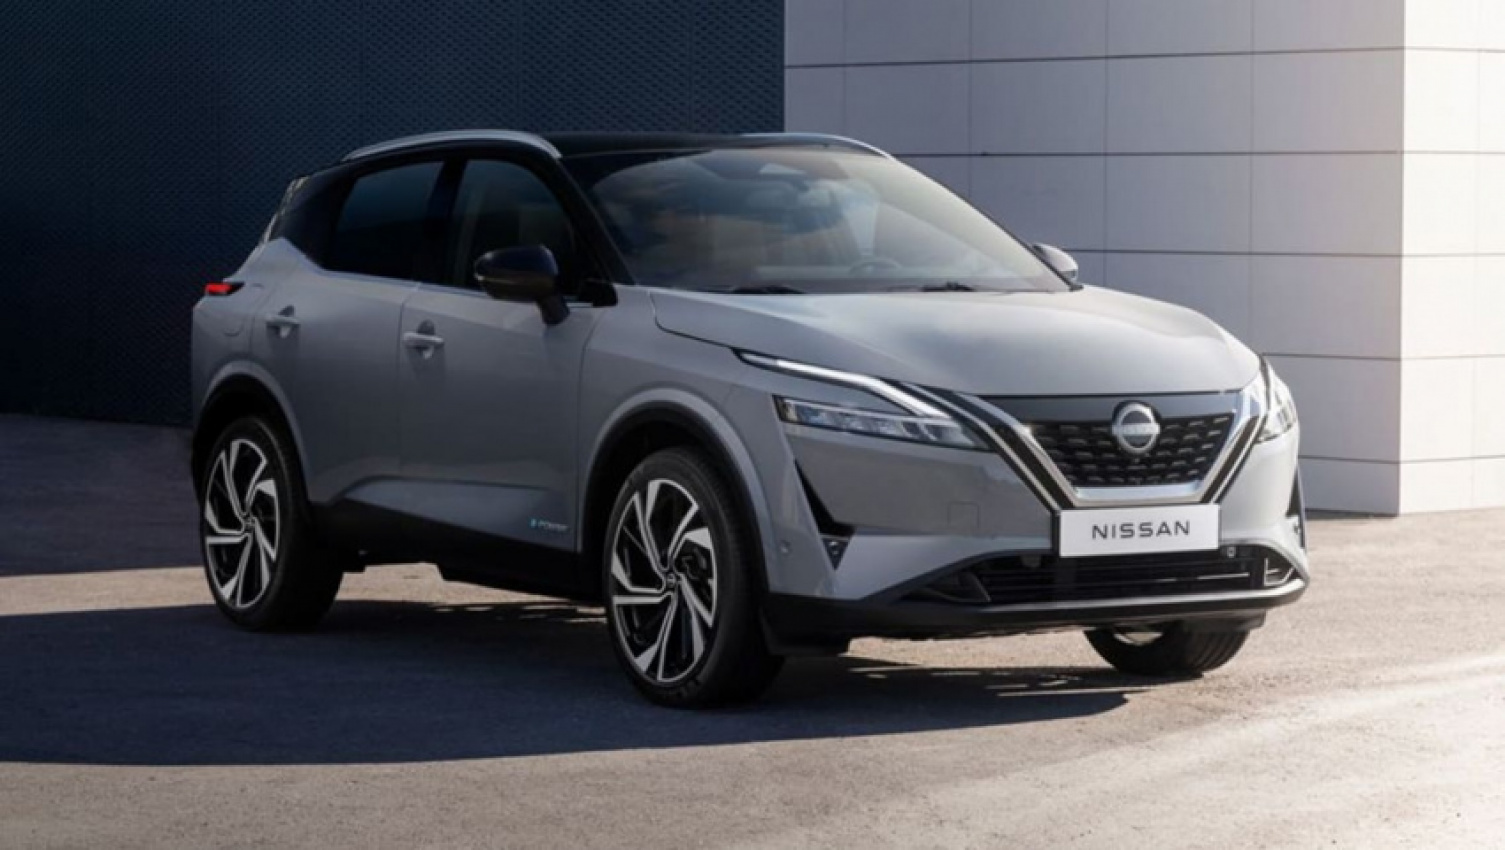 autos, cars, nissan, toyota, hybrid cars, industry news, nissan news, nissan qashqai, nissan qashqai 2022, nissan suv range, showroom news, toyota c-hr, how fuel efficient is the 2022 nissan qashqai epower electric suv? new toyota c-hr hybrid rival isn't too much more frugal than its traditional petrol sibling